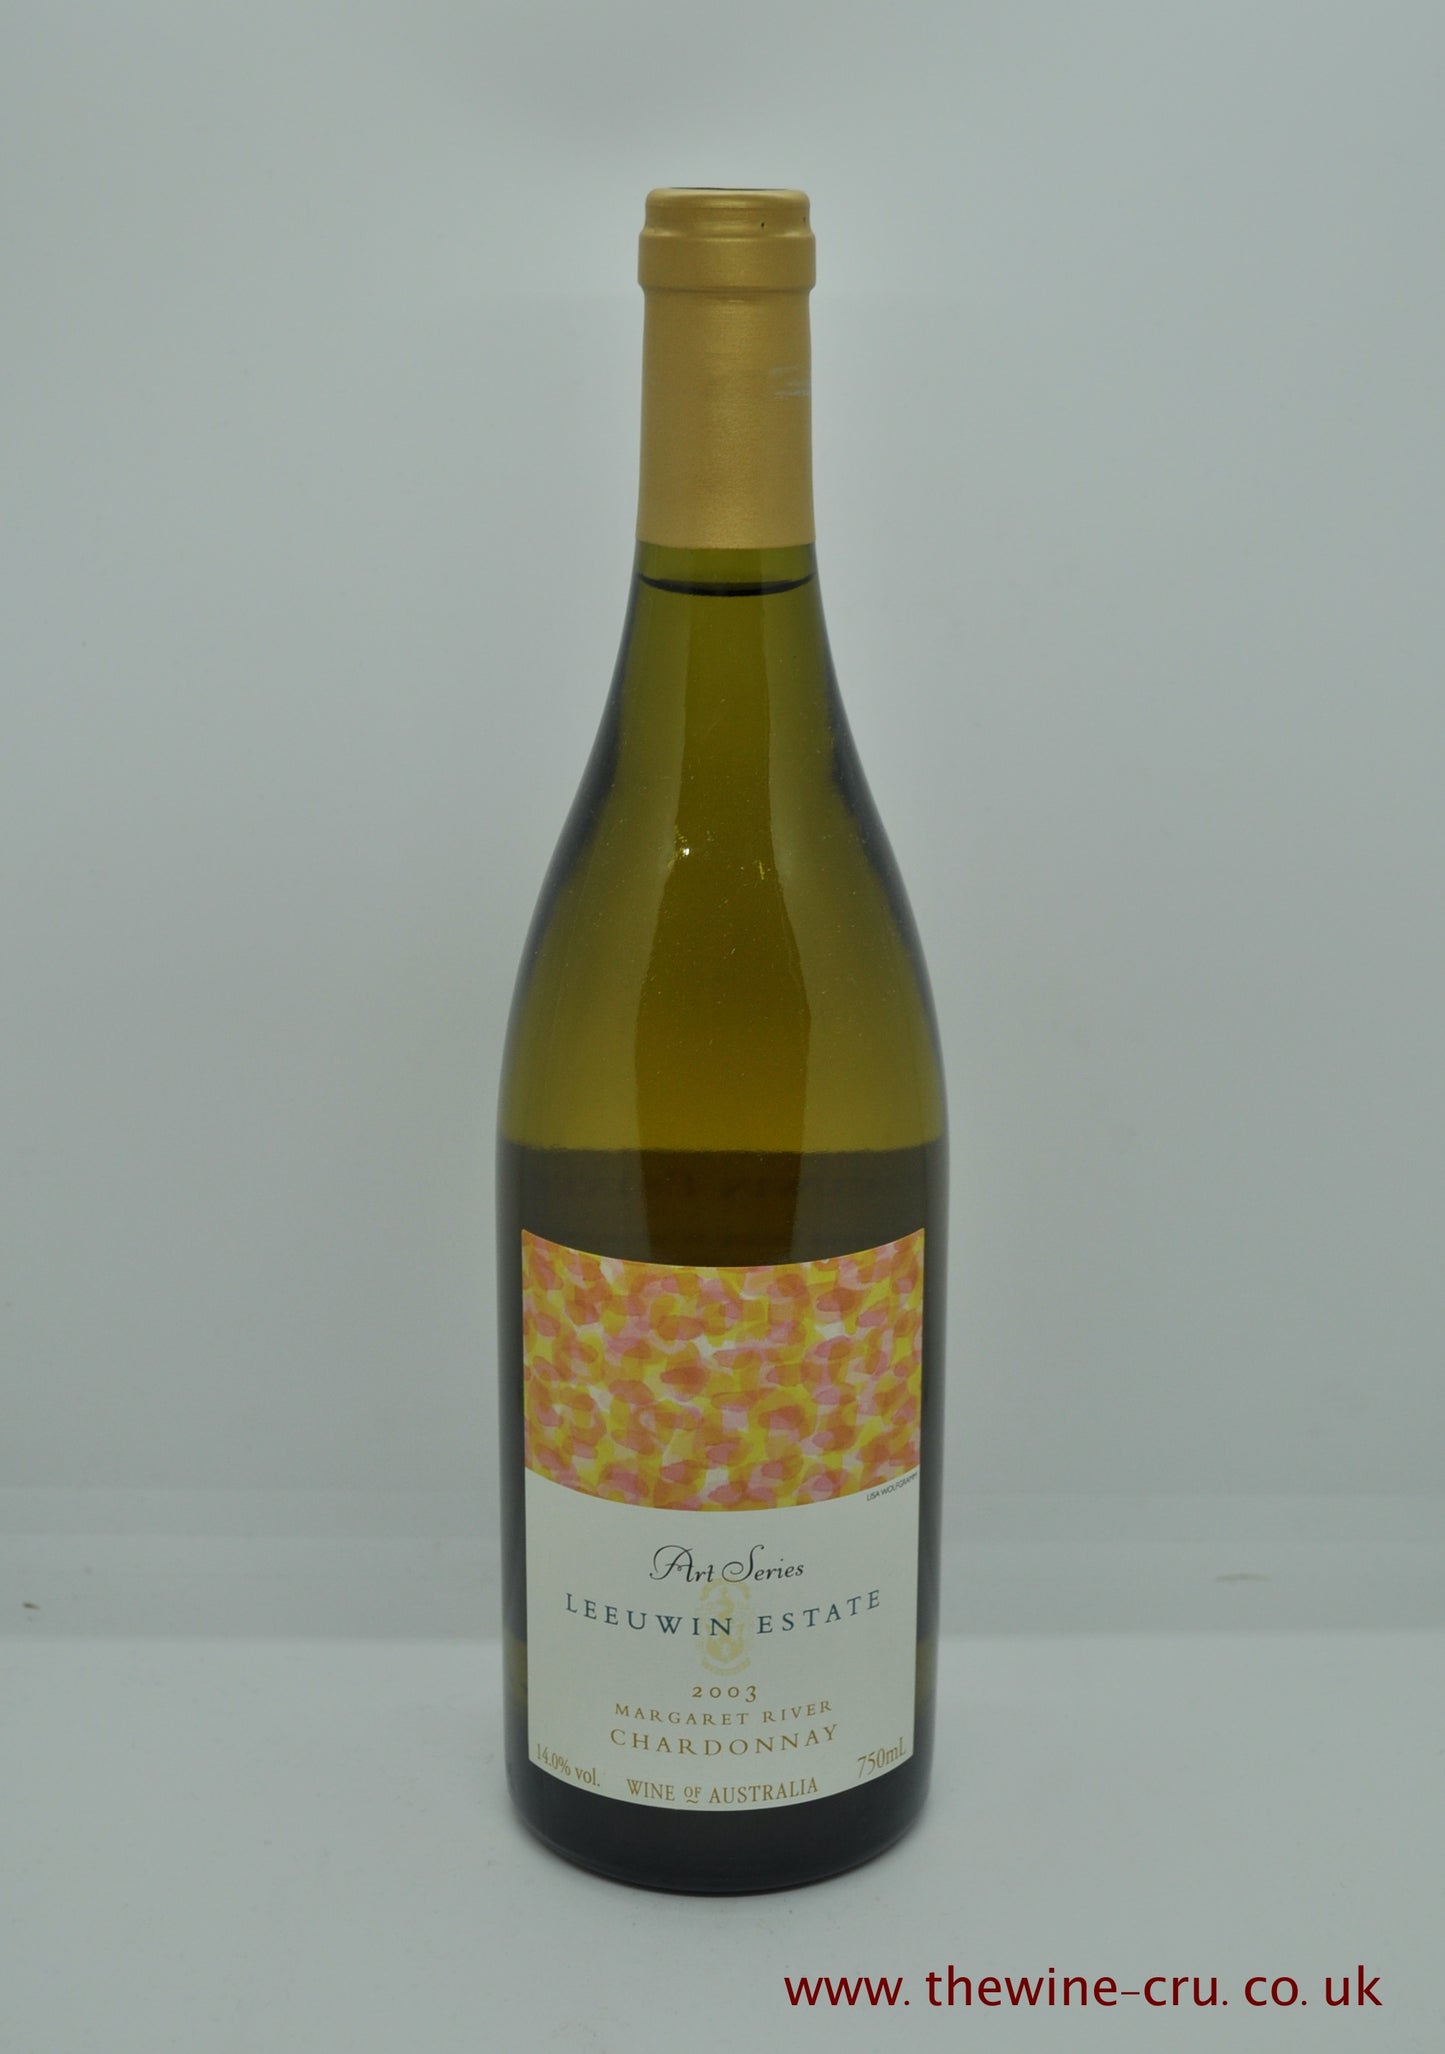 2003 vintage white wine. Leeuwin Art Series Chardonnay. Australia. The bottles are in good condition with the wine level just below the base of the cork. Immediate delivery. Free local delivery. Gift wrapping available.